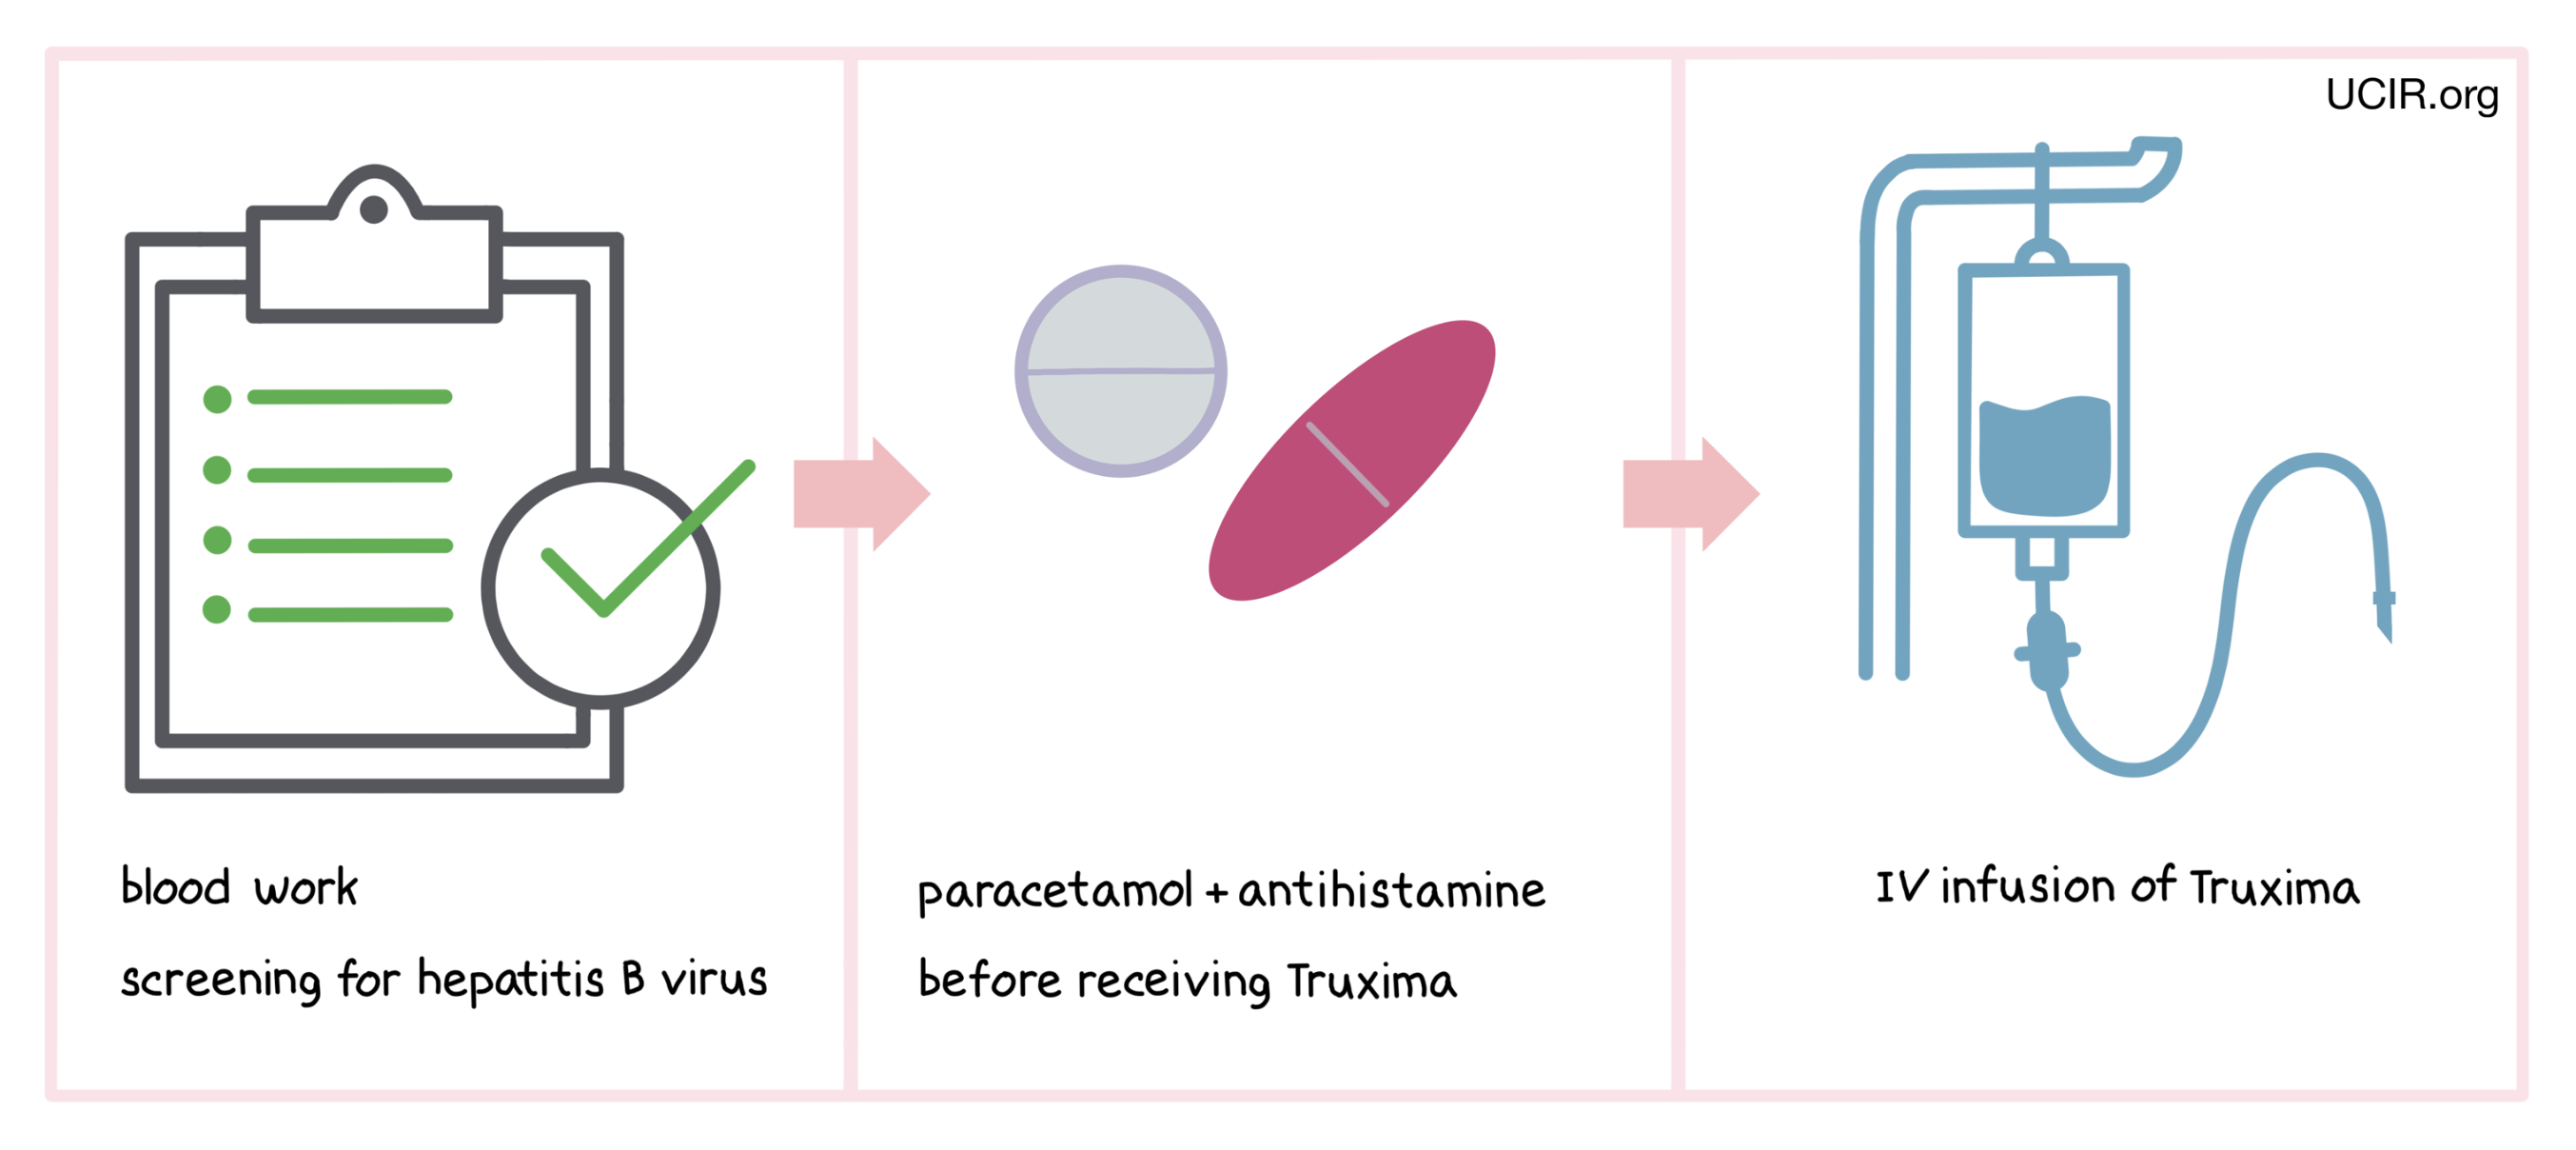 How is Truxima administered? 